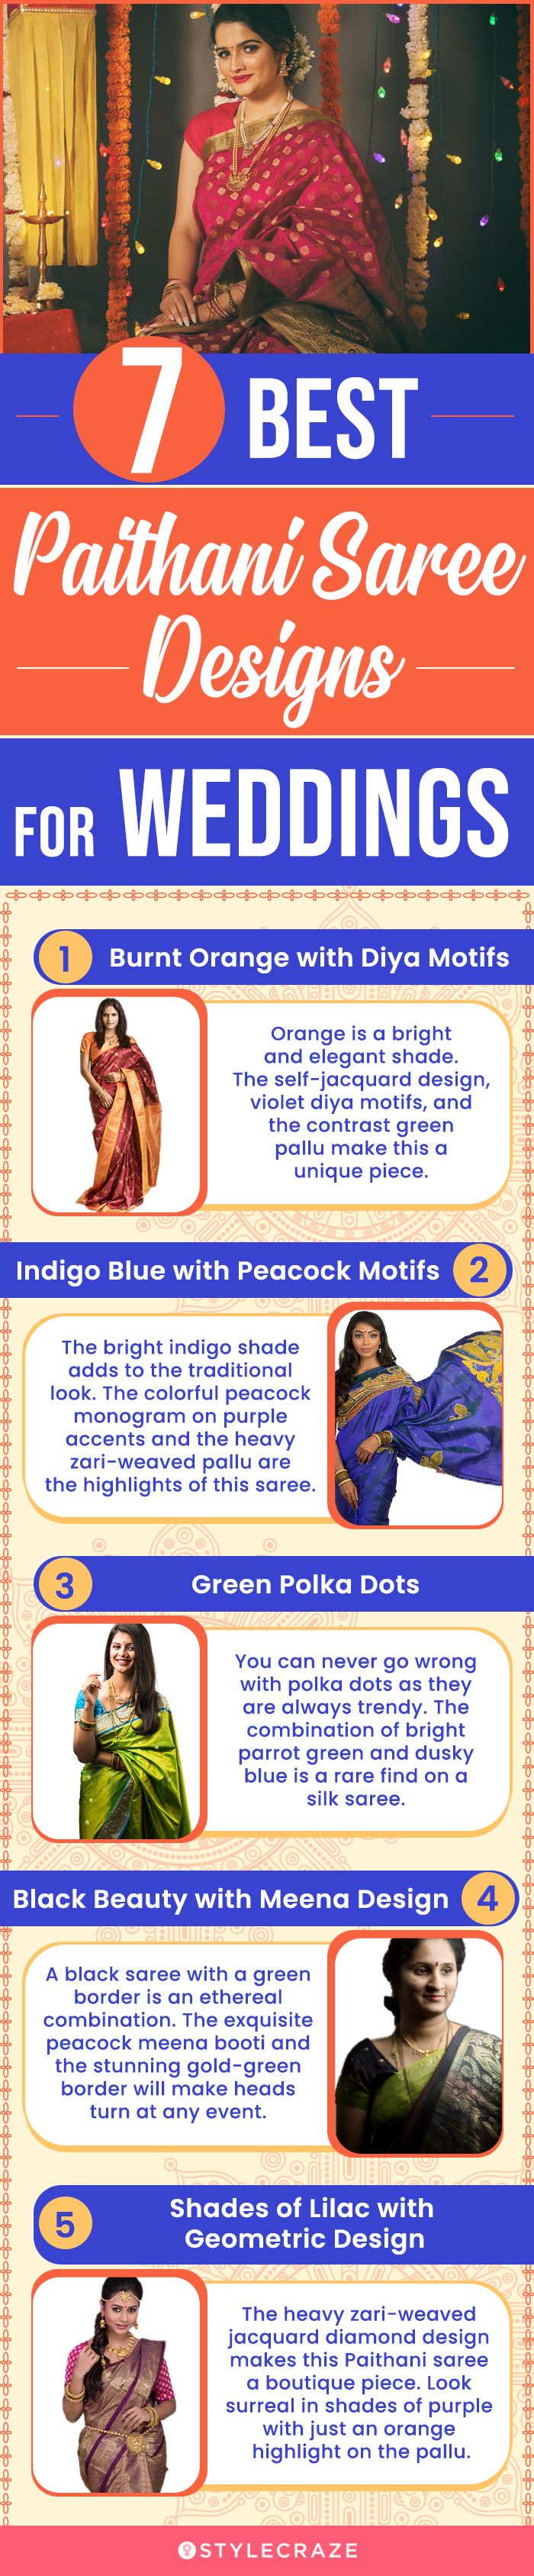 7 best paithani saree designs for weddings (infographic)